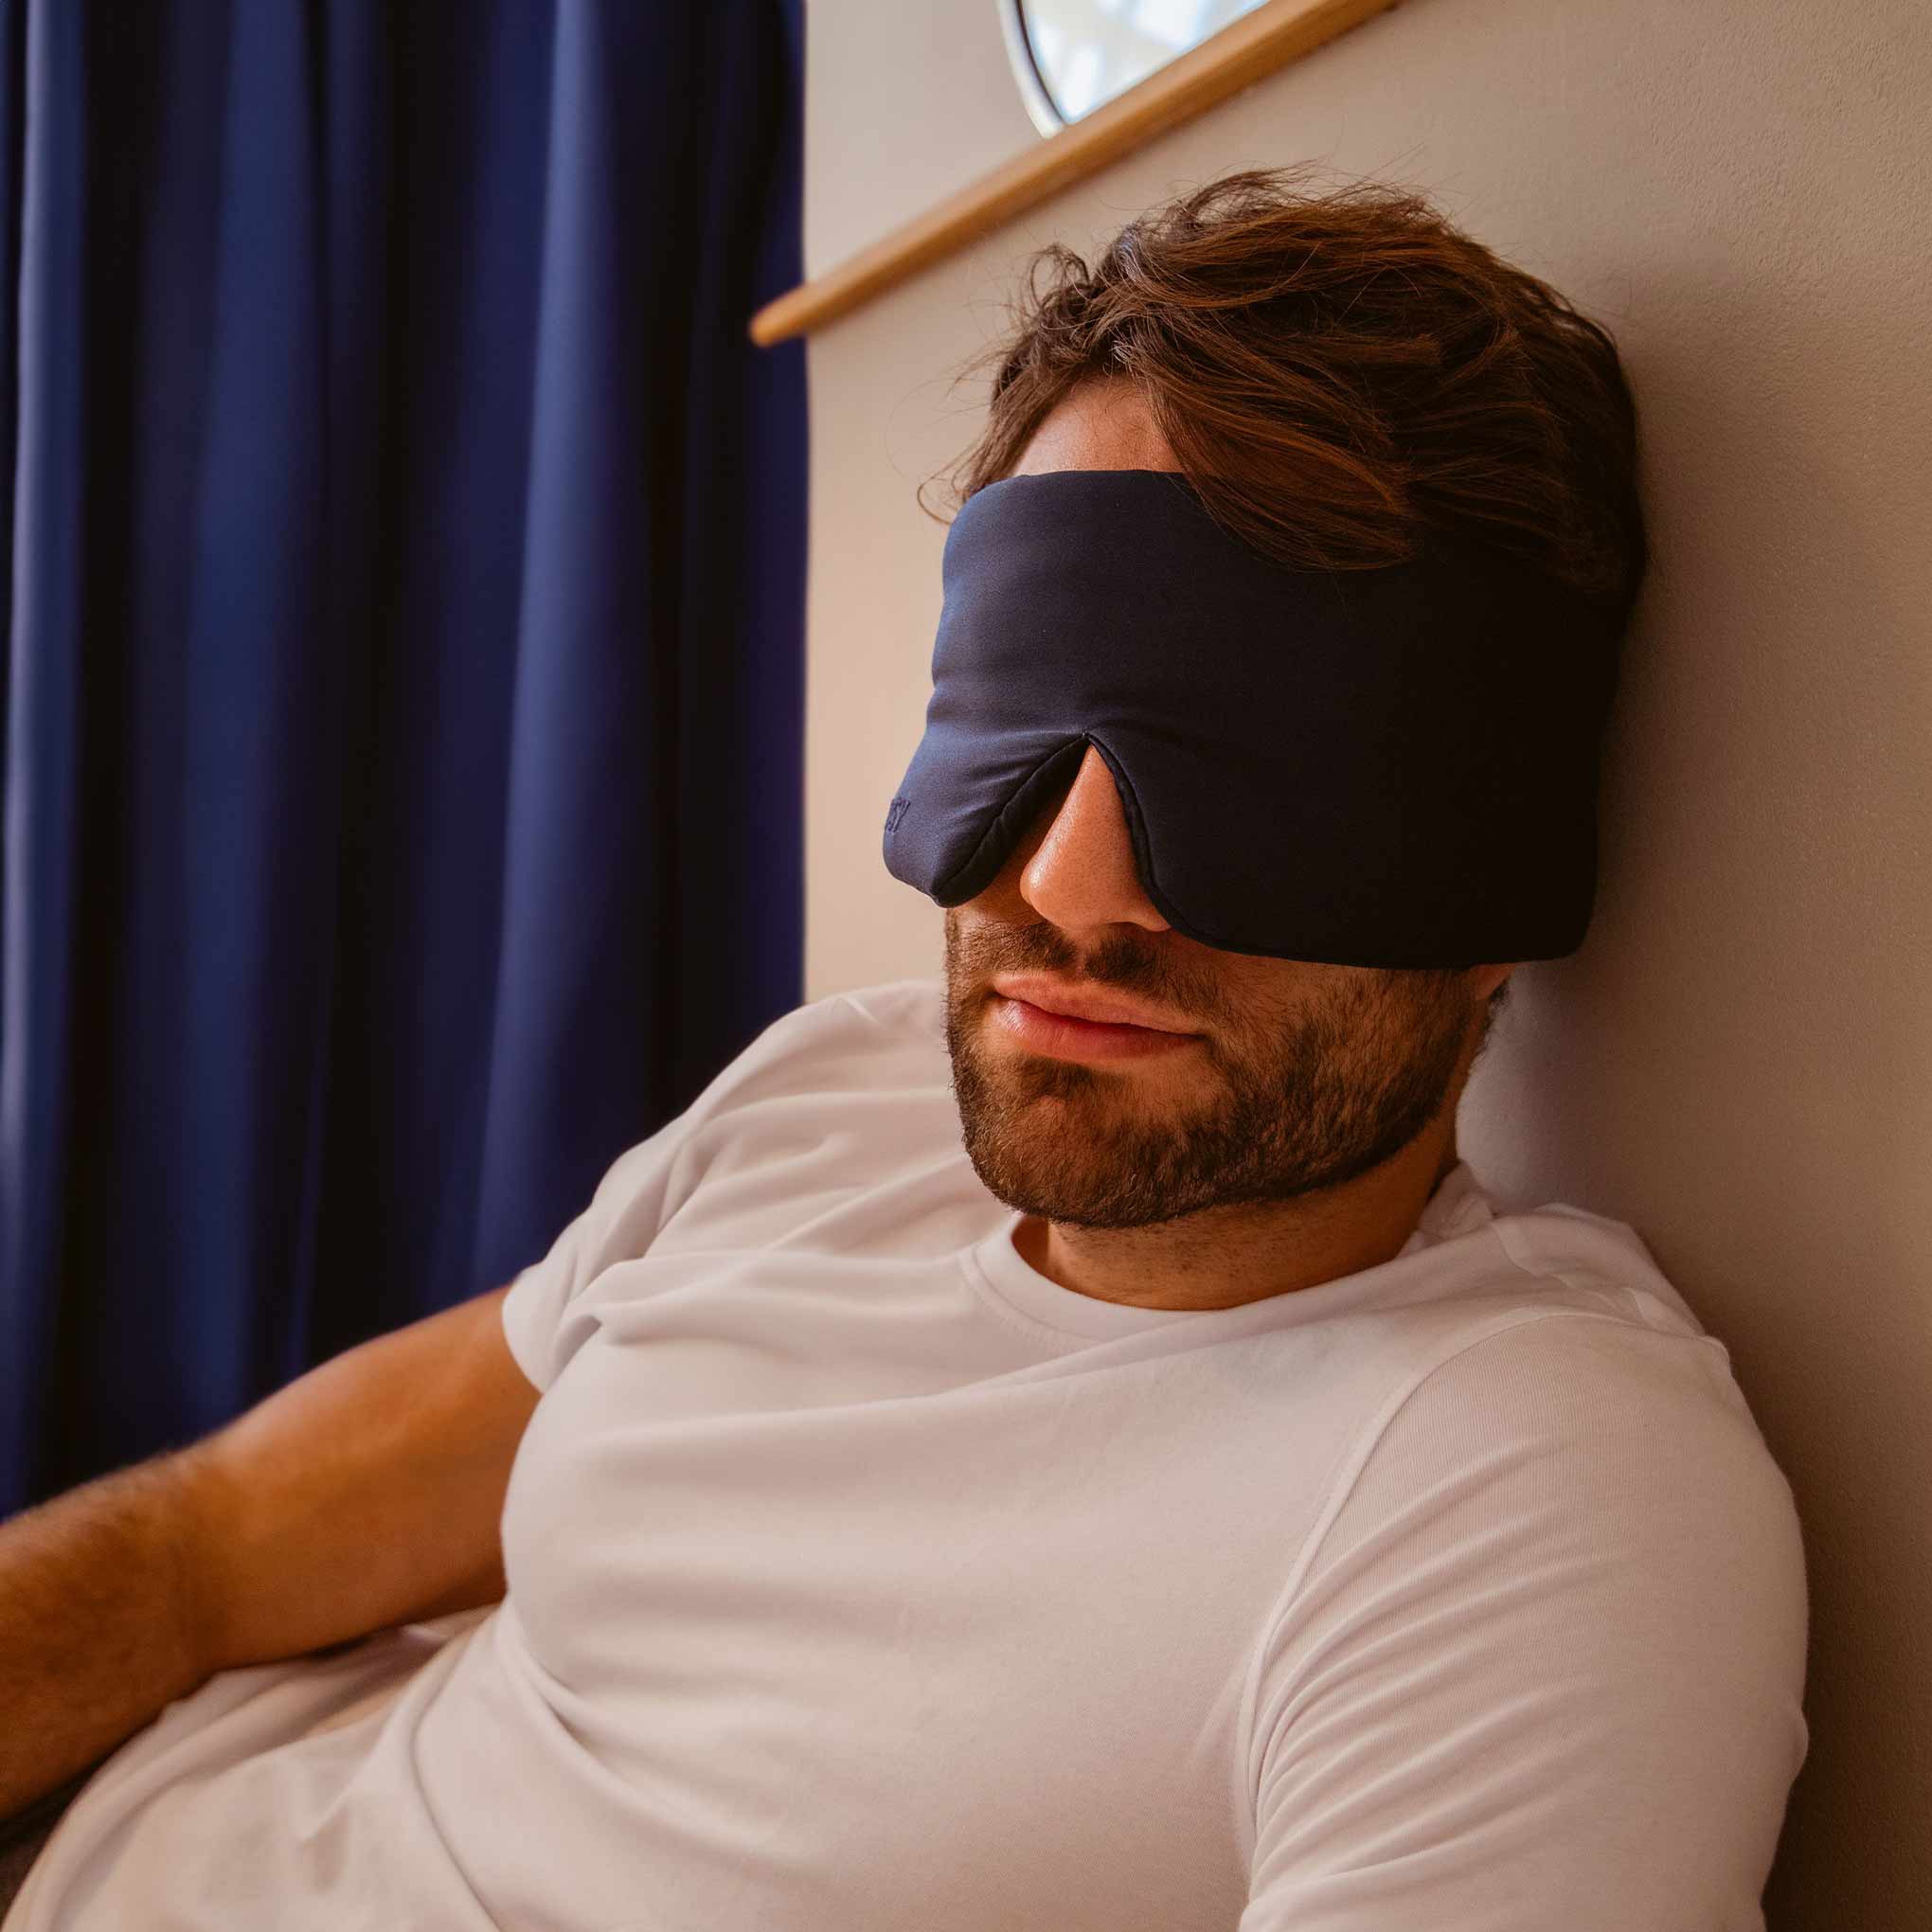 Sleep Eye Mask For Women, Made Of Silk, With Health Breathing Functions For  Night Sleep, Spa And Relaxation